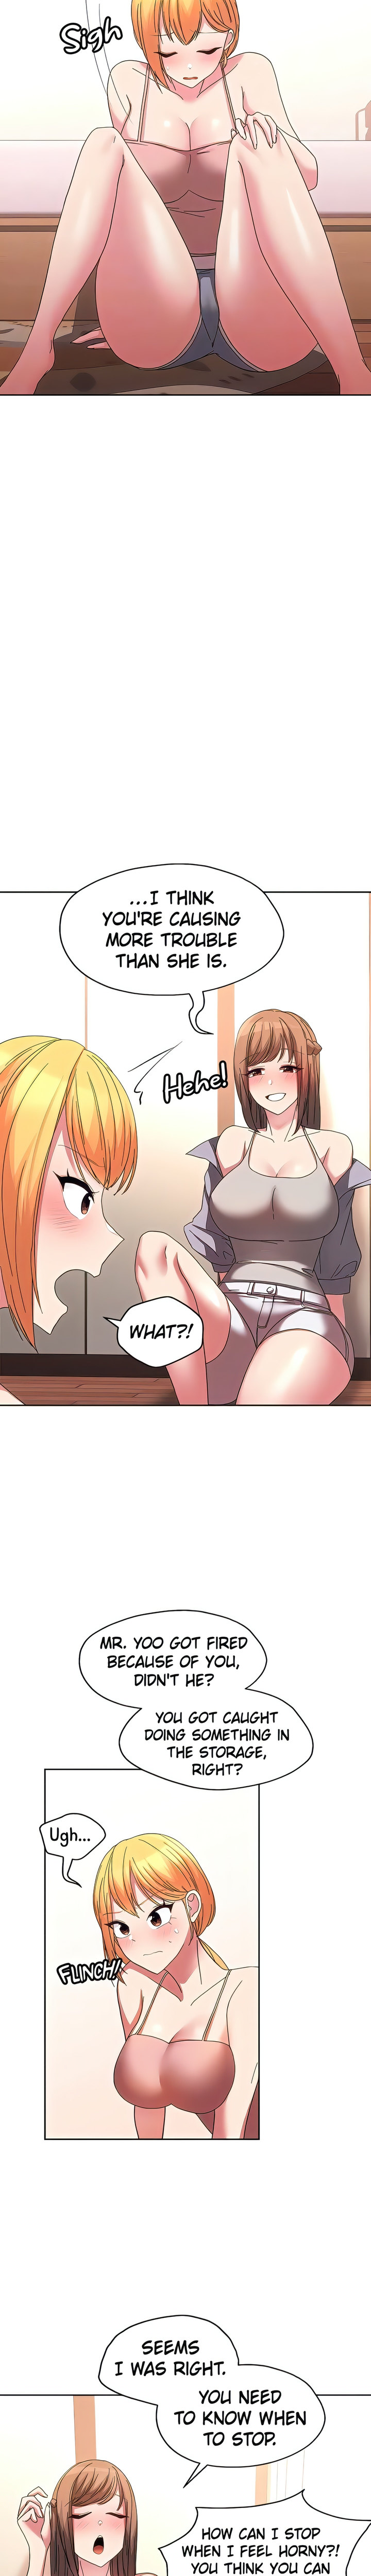 Girls I Used to Teach - Chapter 31 Page 10